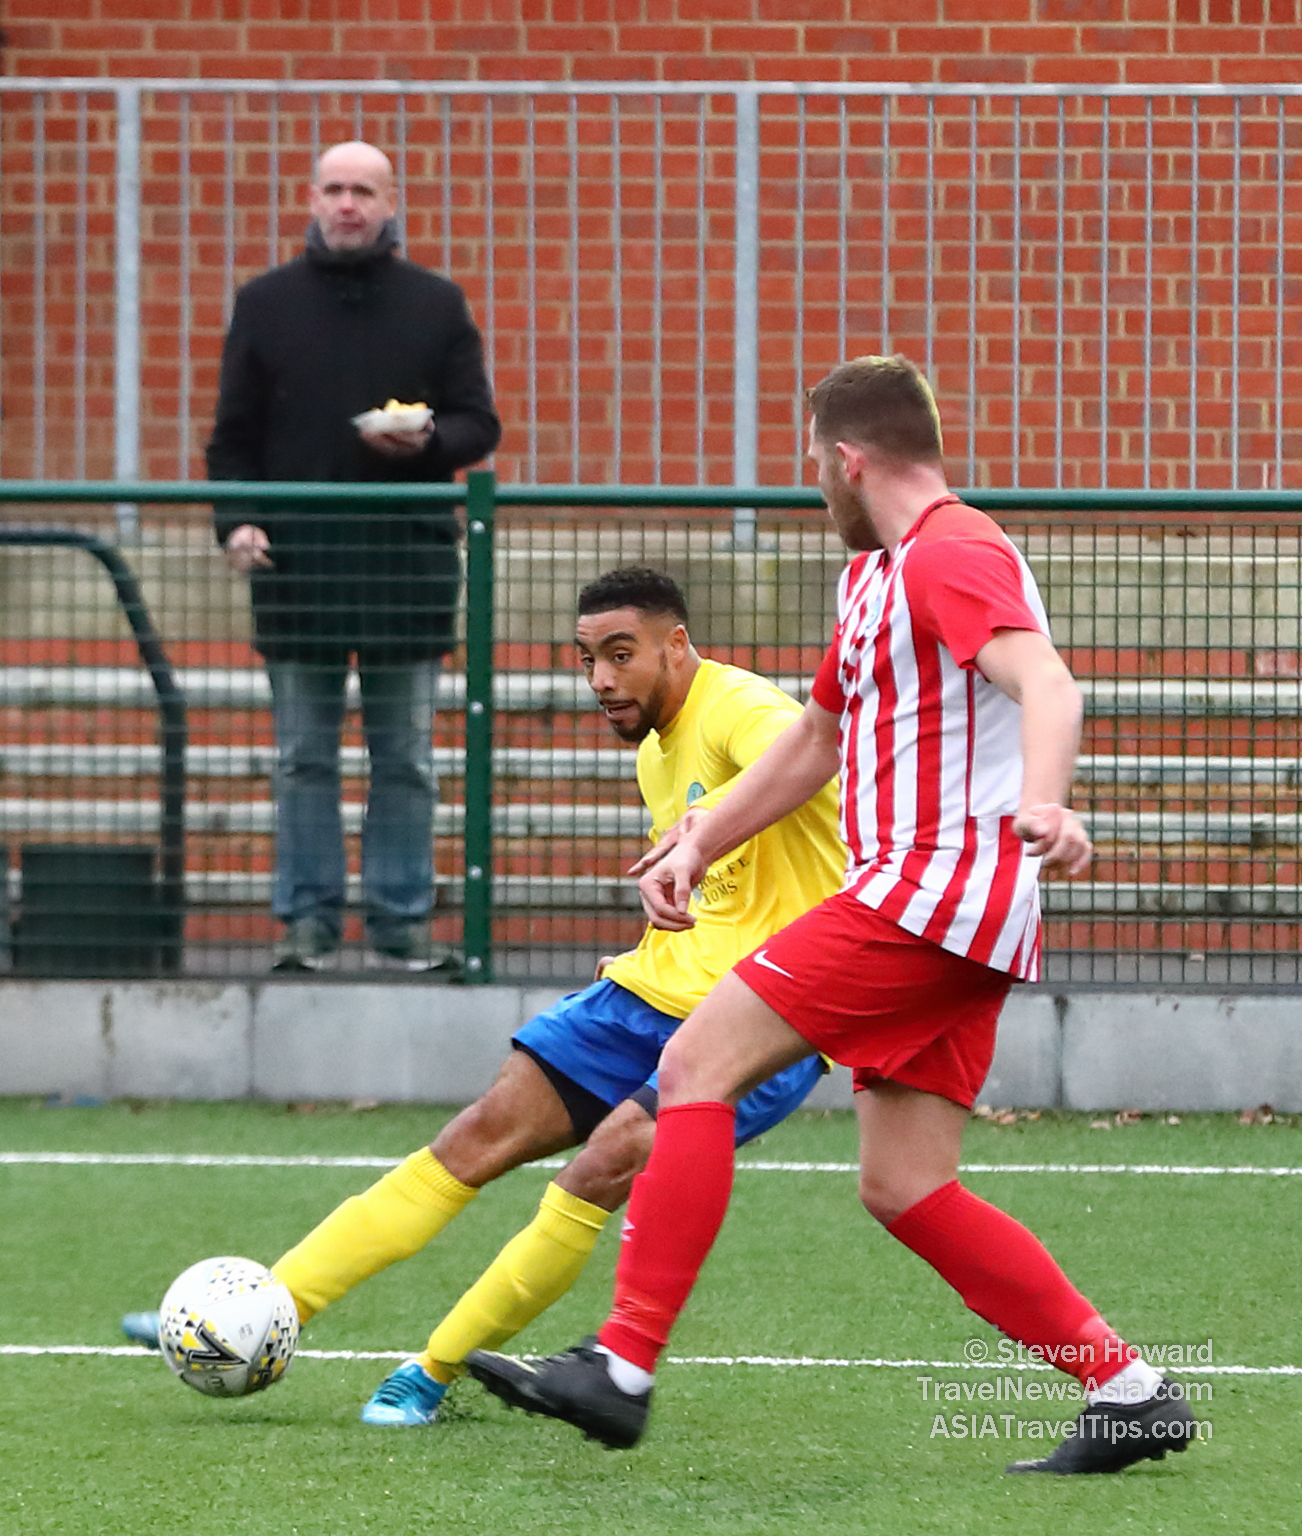 Pictures from Ascot United FC vs Colliers Wood United on 11 January 2020. Pictures by Steven Howard of TravelNewsAsia.com